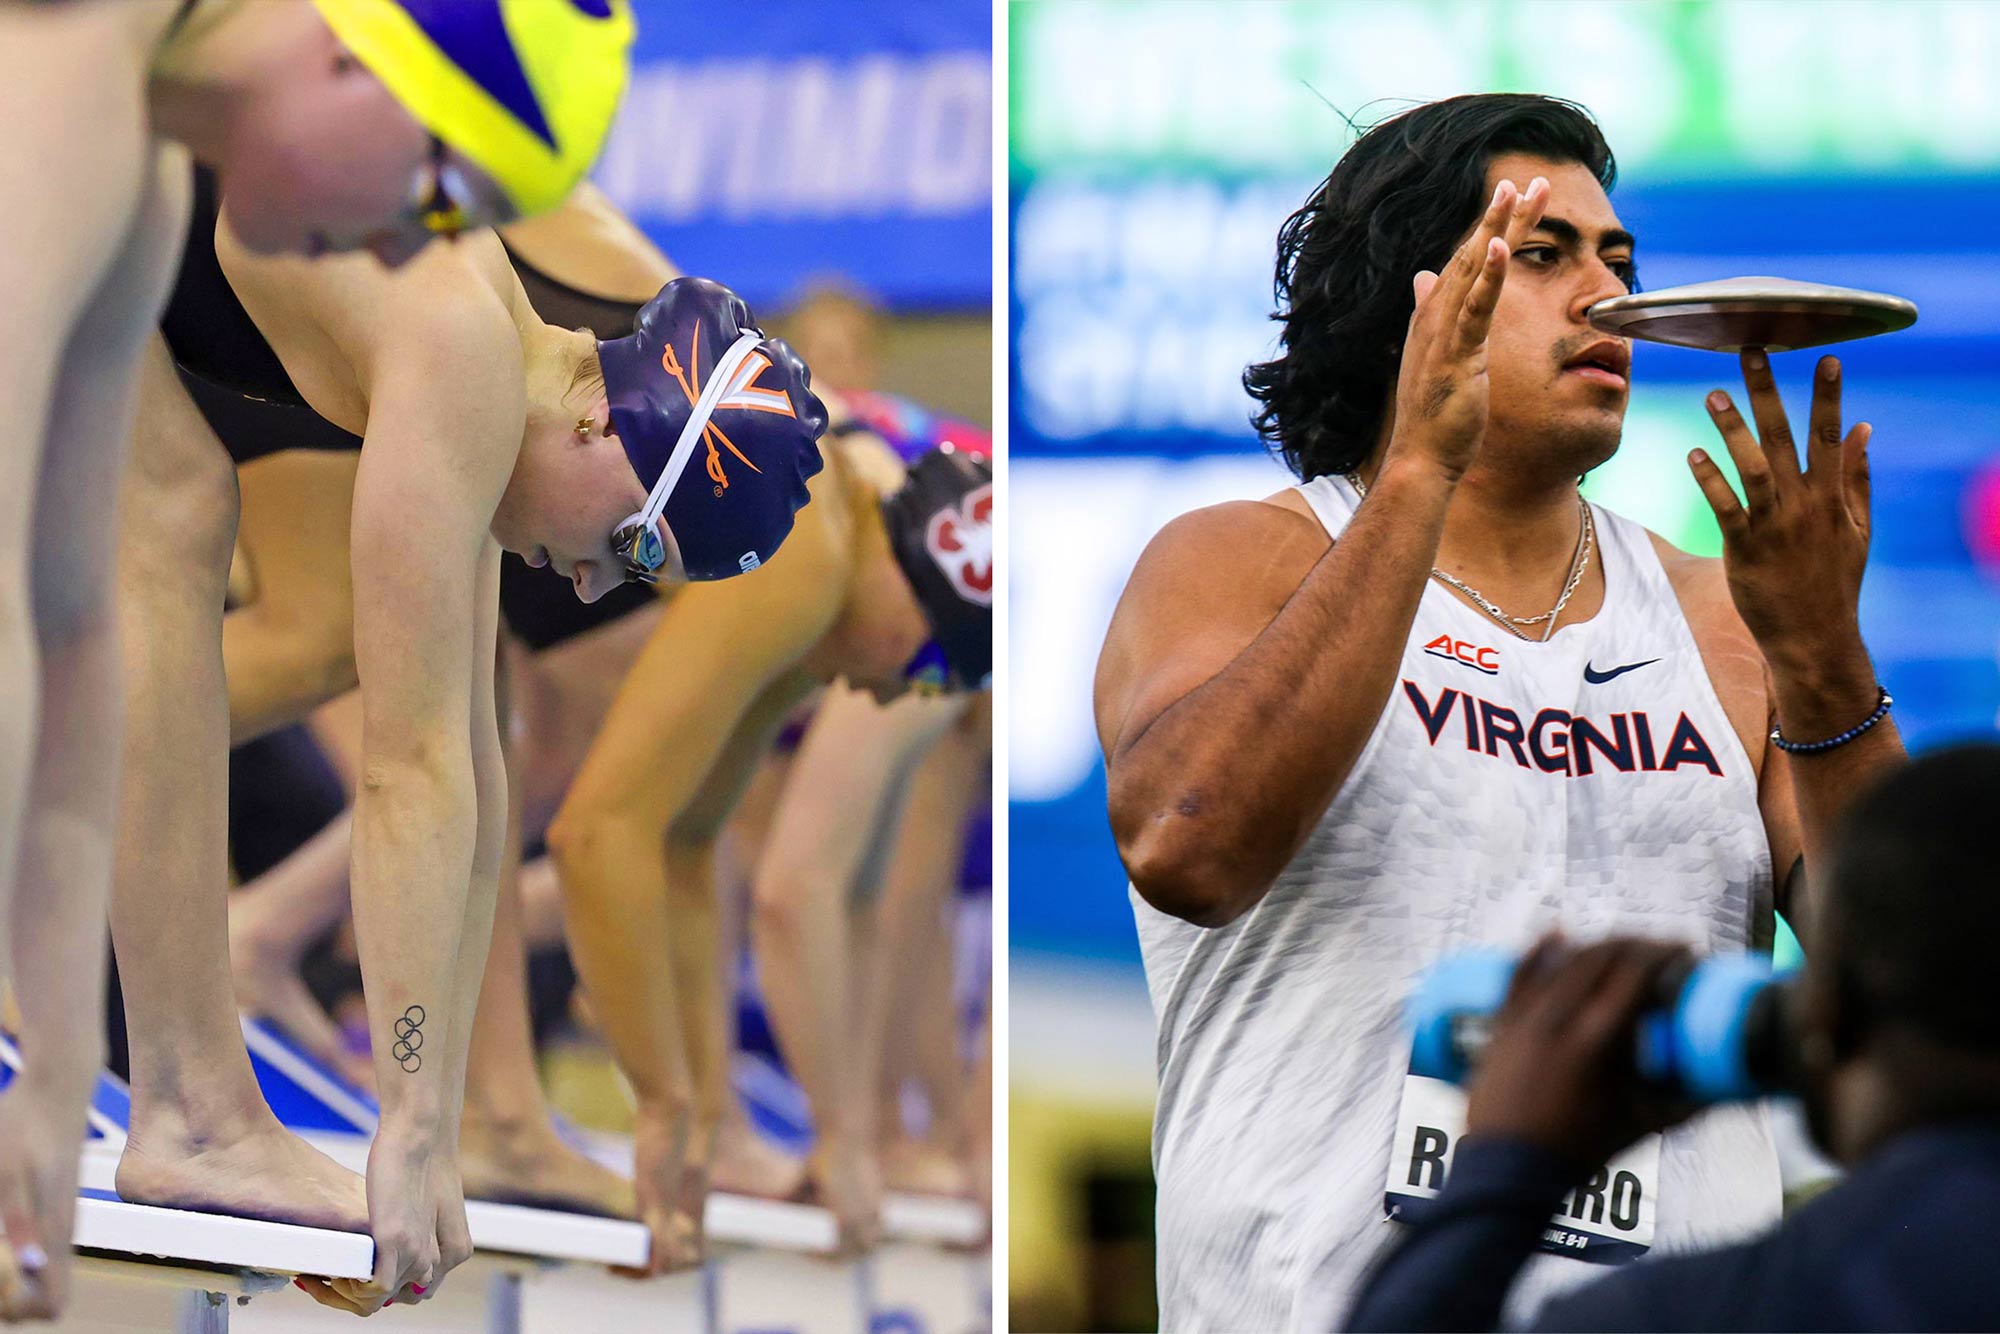 Left: Swimmers on the starting blocks.  Right: Man jumping in the air catching a disc